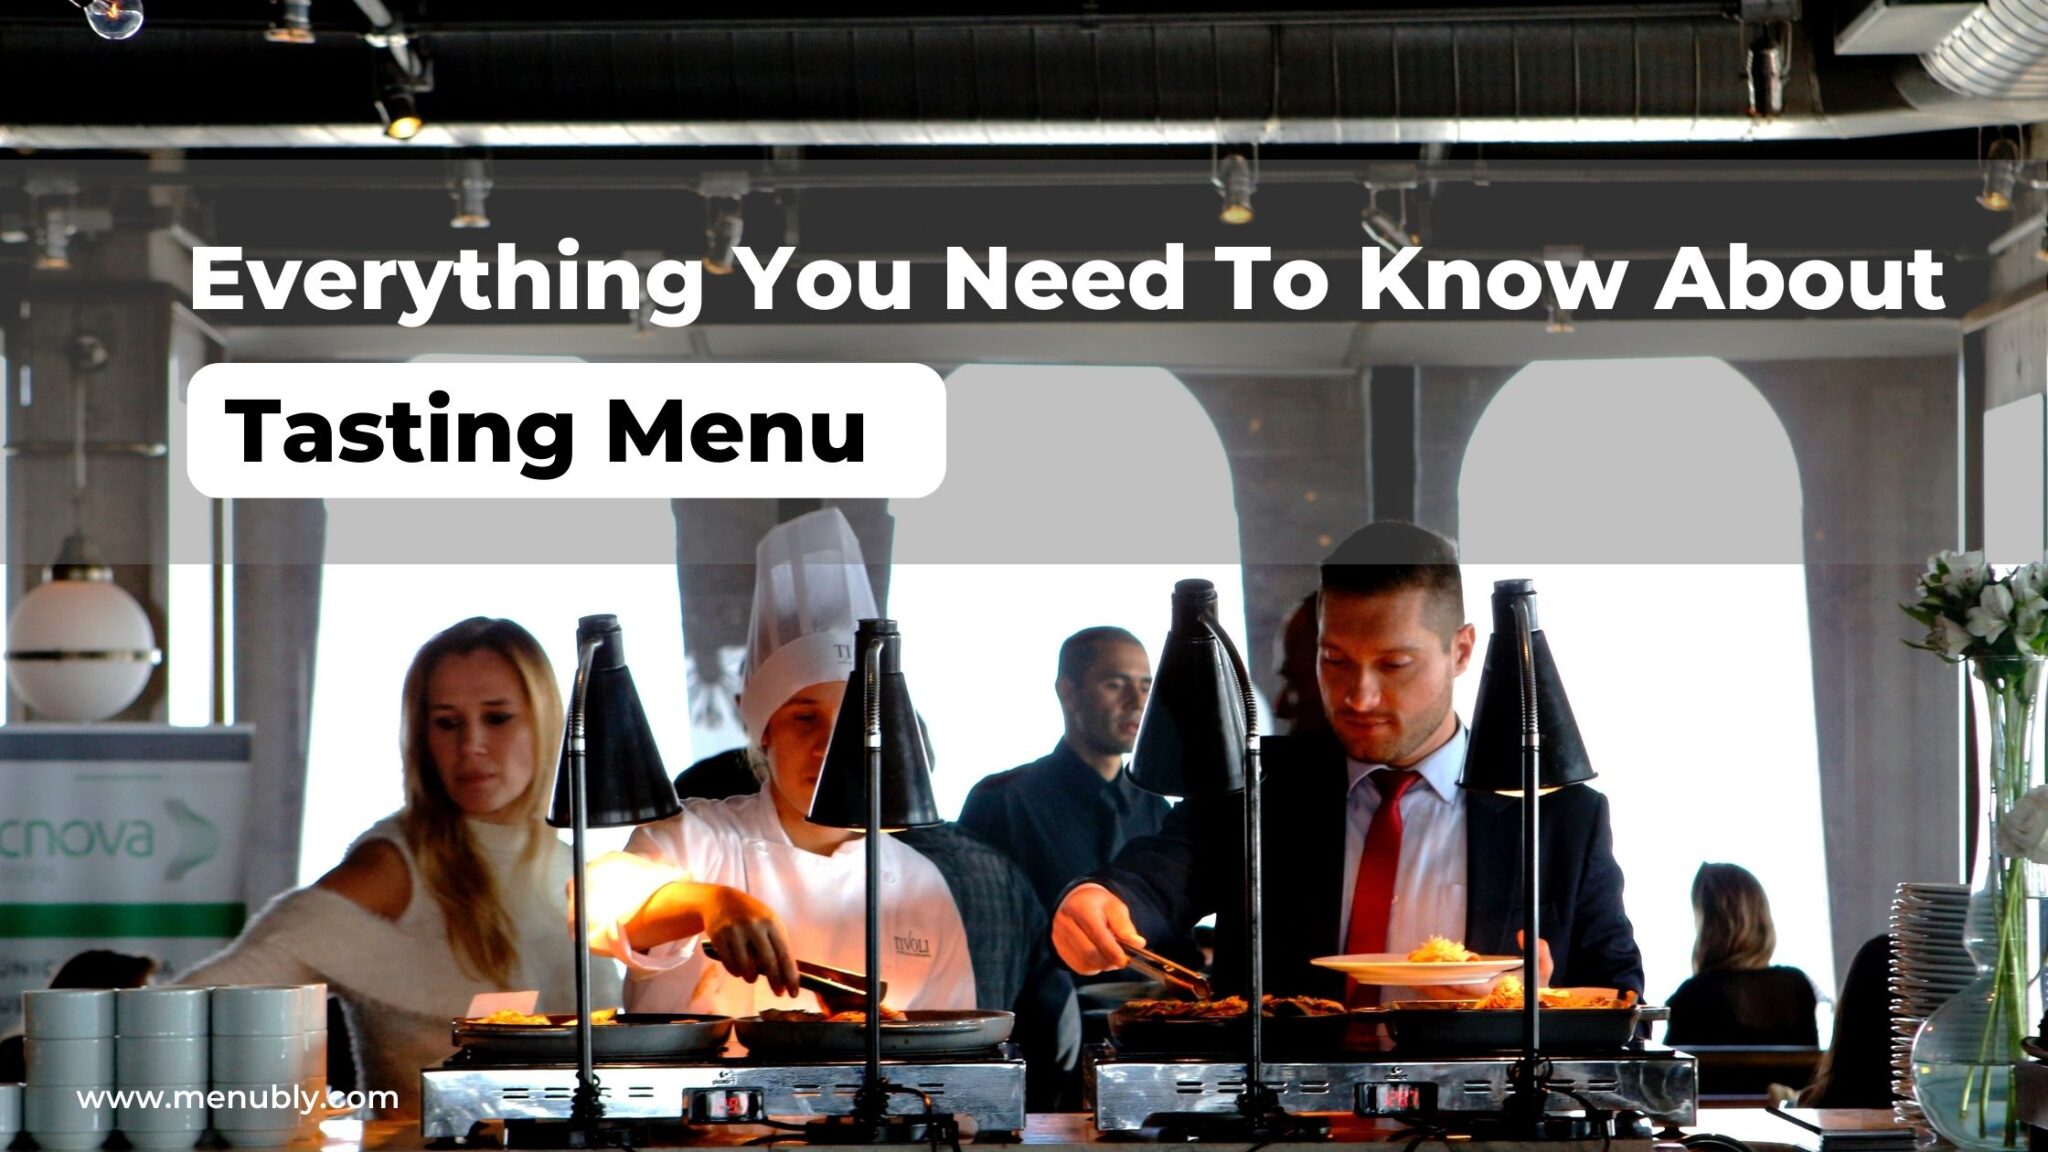 everything-you-need-to-know-about-tasting-menu-menubly